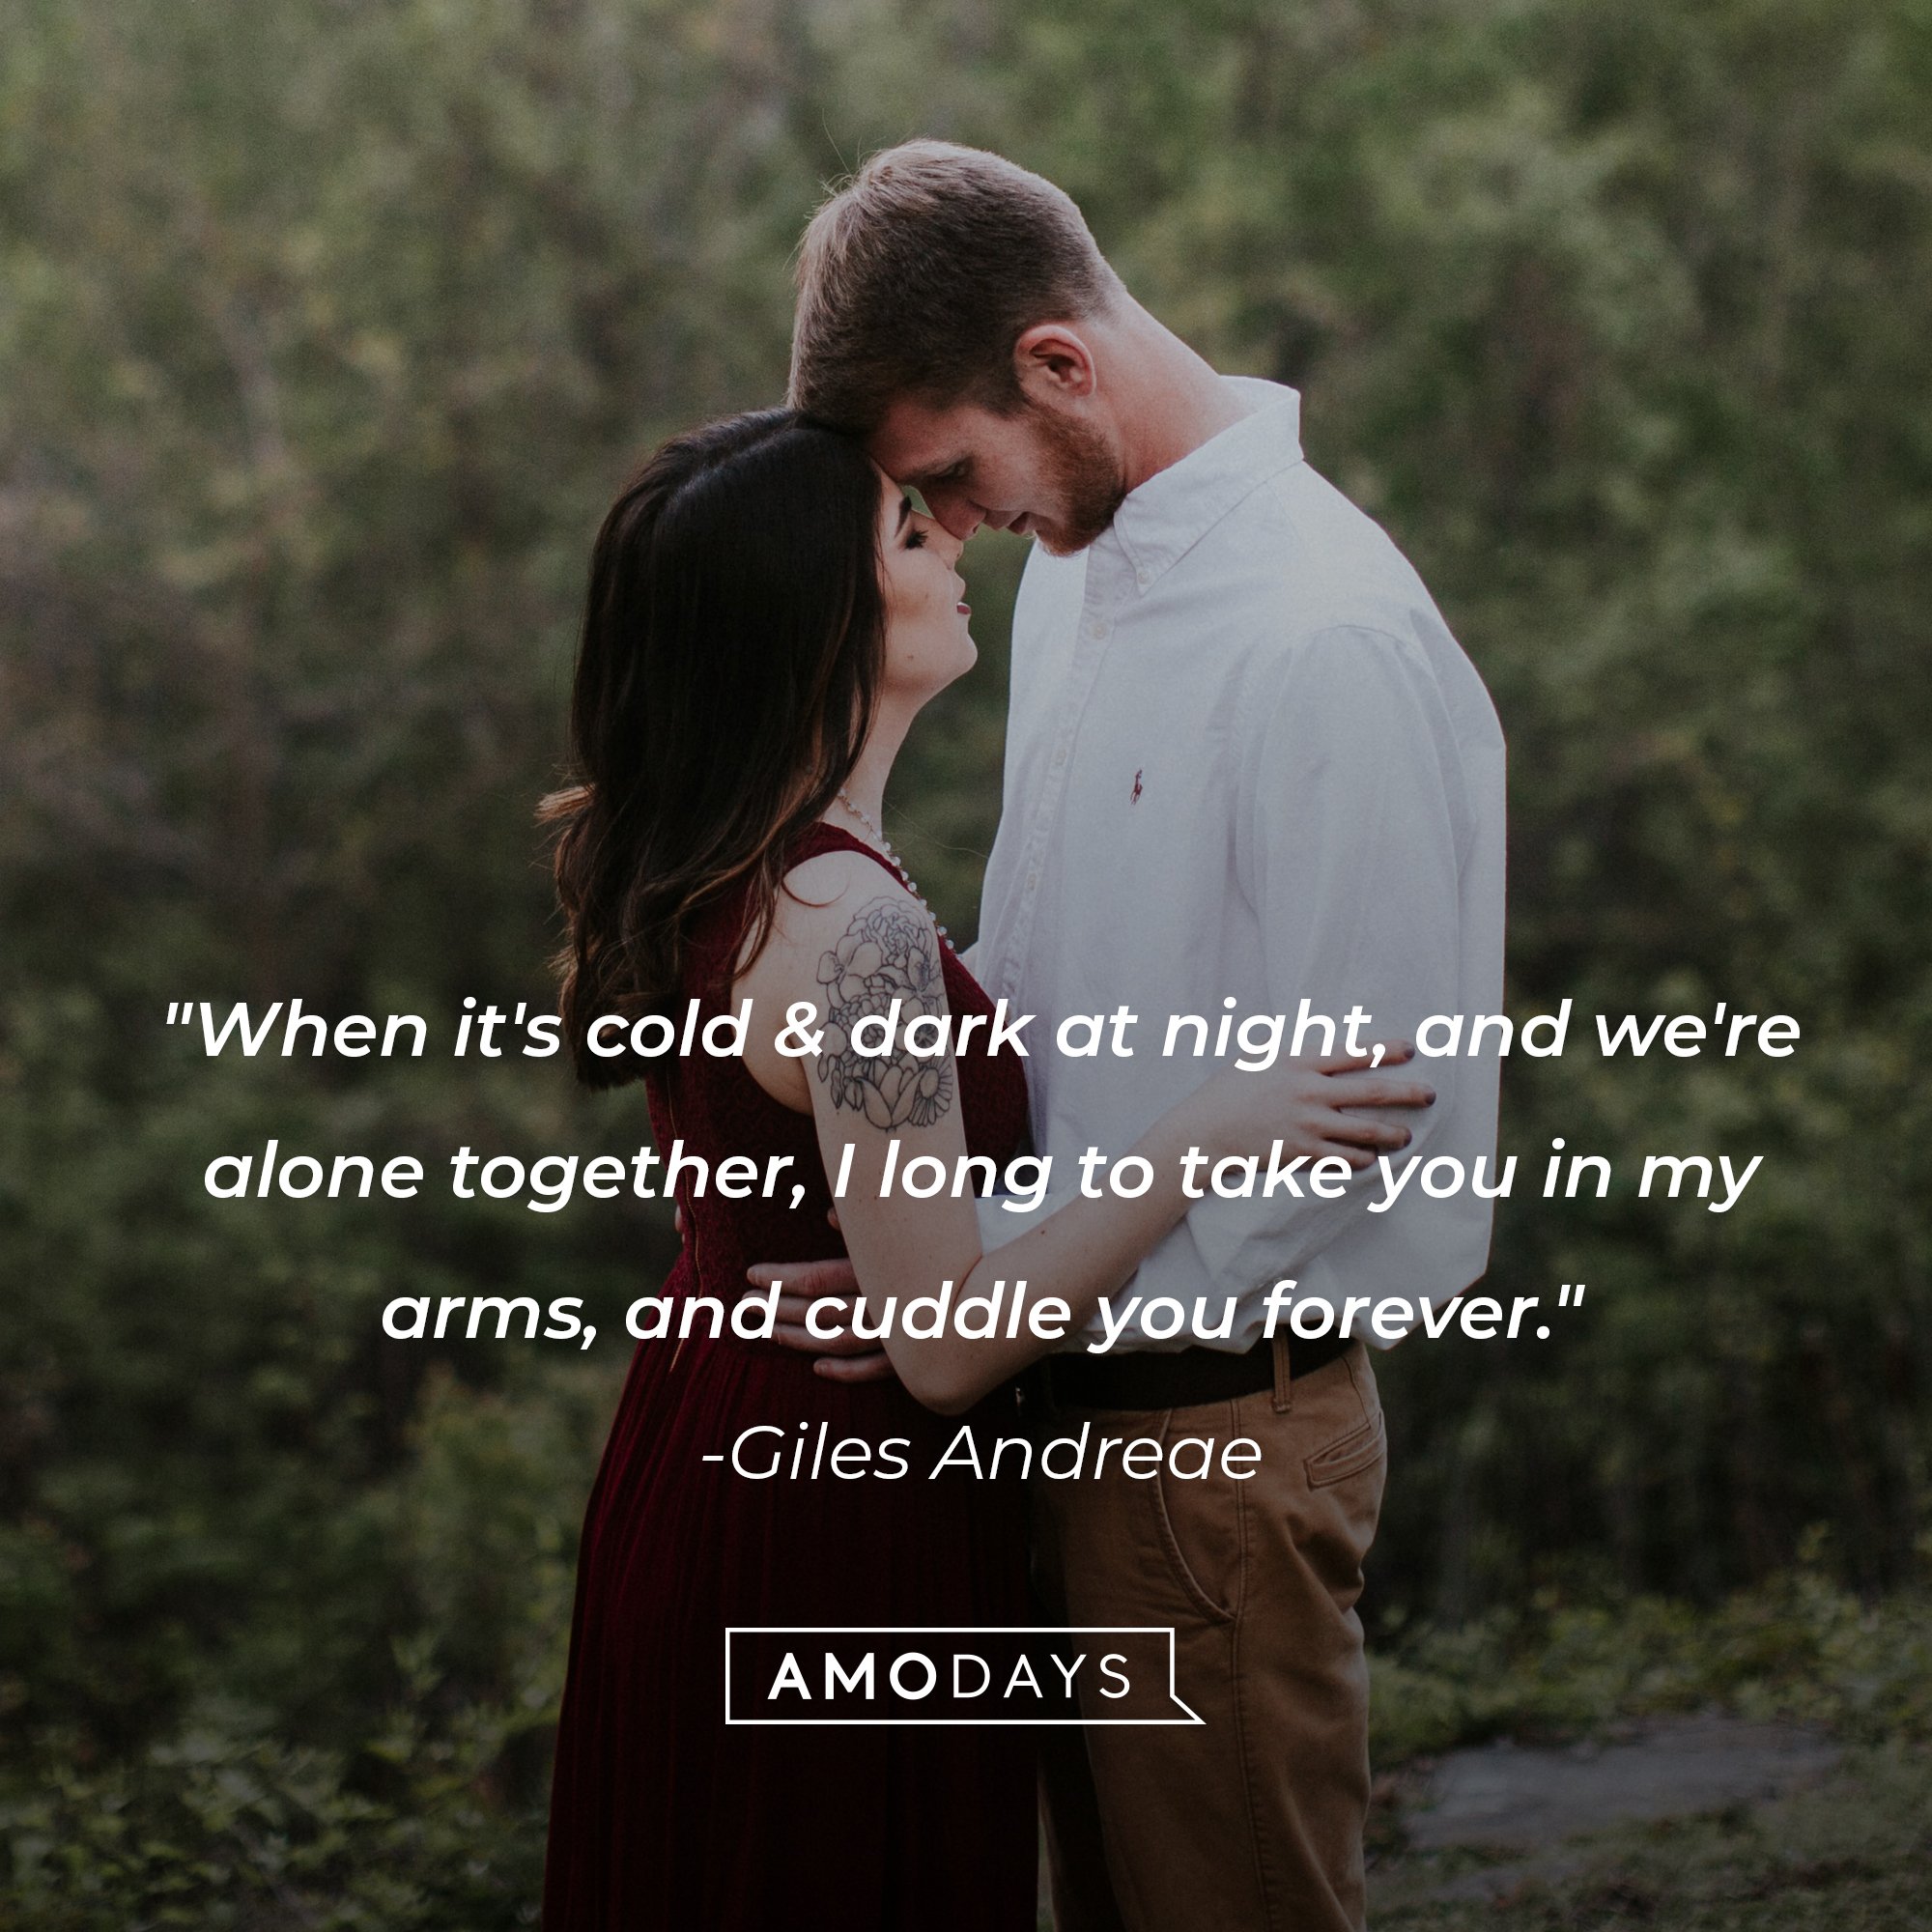 Giles Andreae's quote: "When it's cold & dark at night, and we're alone together, I long to take you in my arms, and cuddle you forever." | Image: AmoDays